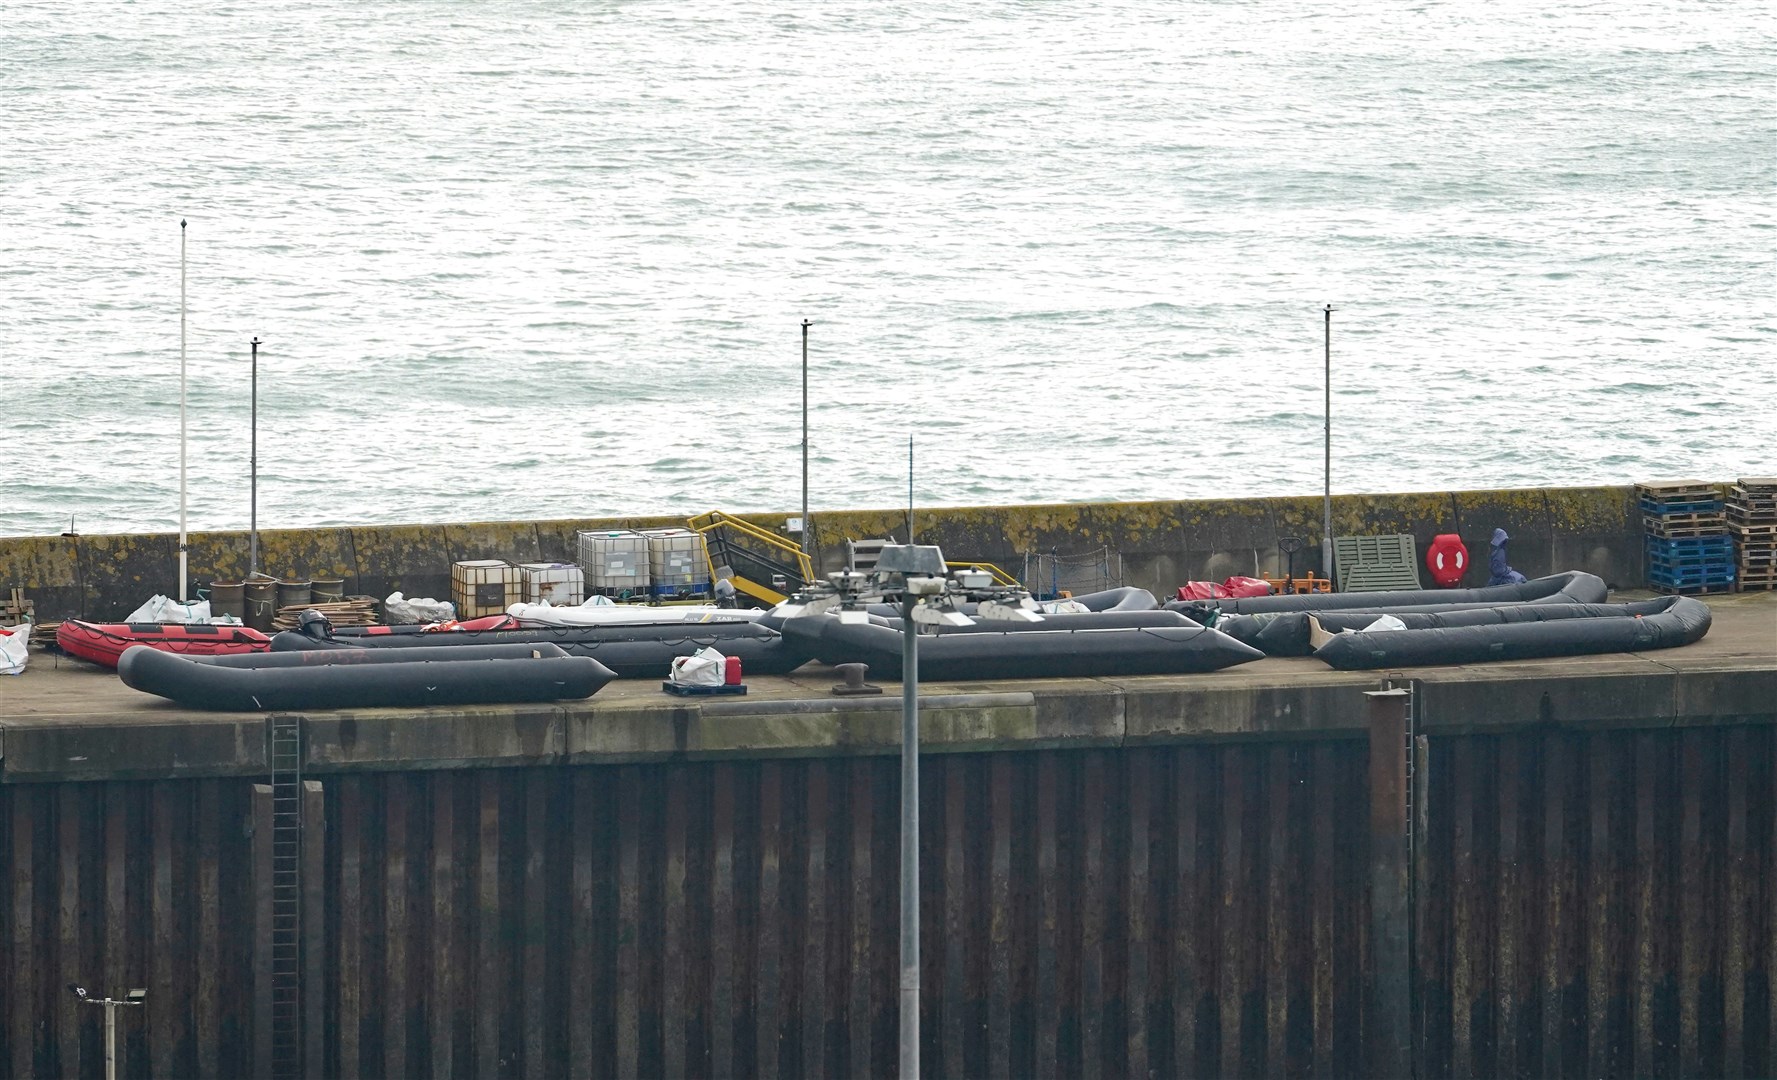 Boats used in previous crossings on the quayside after a group of people thought to be migrants are brought in to Dover (Gareth Fuller/PA)